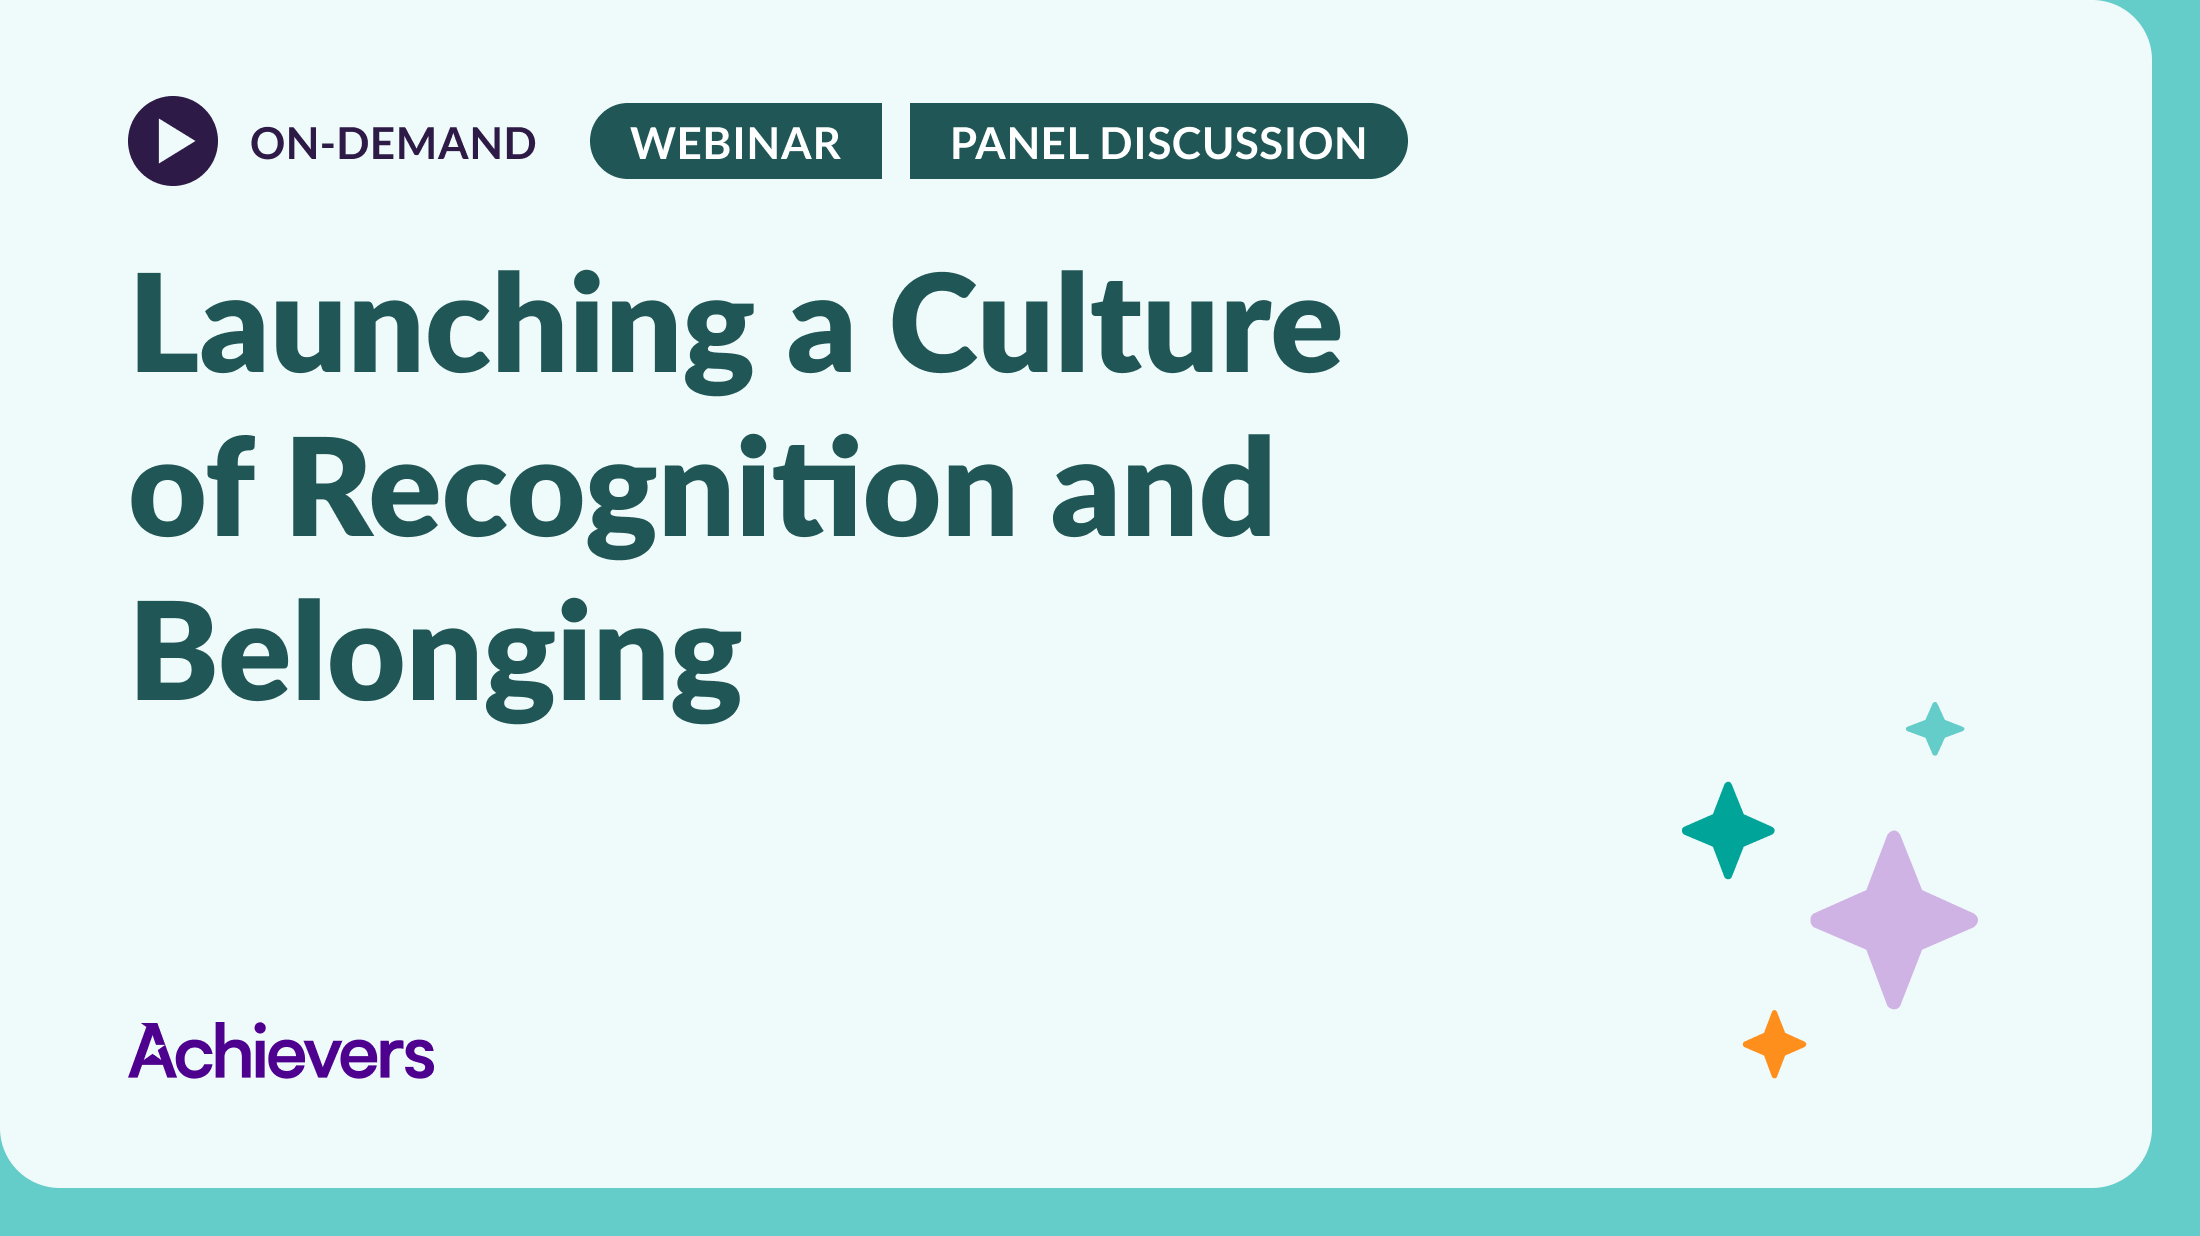 Launching a Culture of Recognition and Belonging